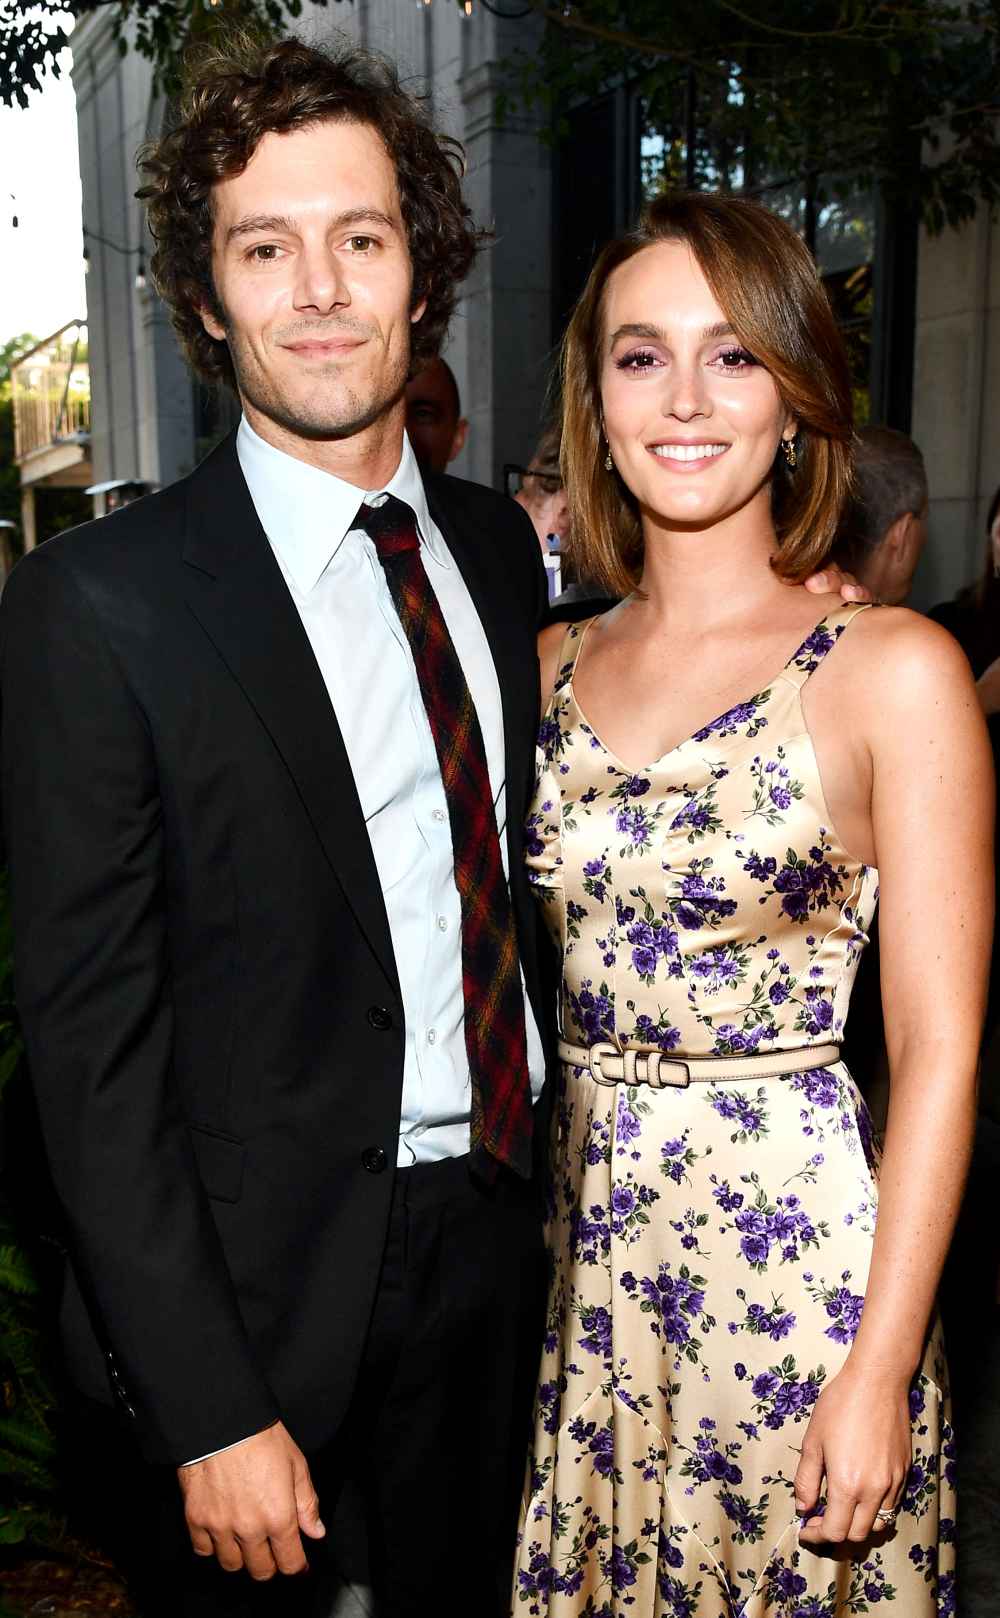 Leighton Meester Snaps Cute Pic of Adam Brody on Set